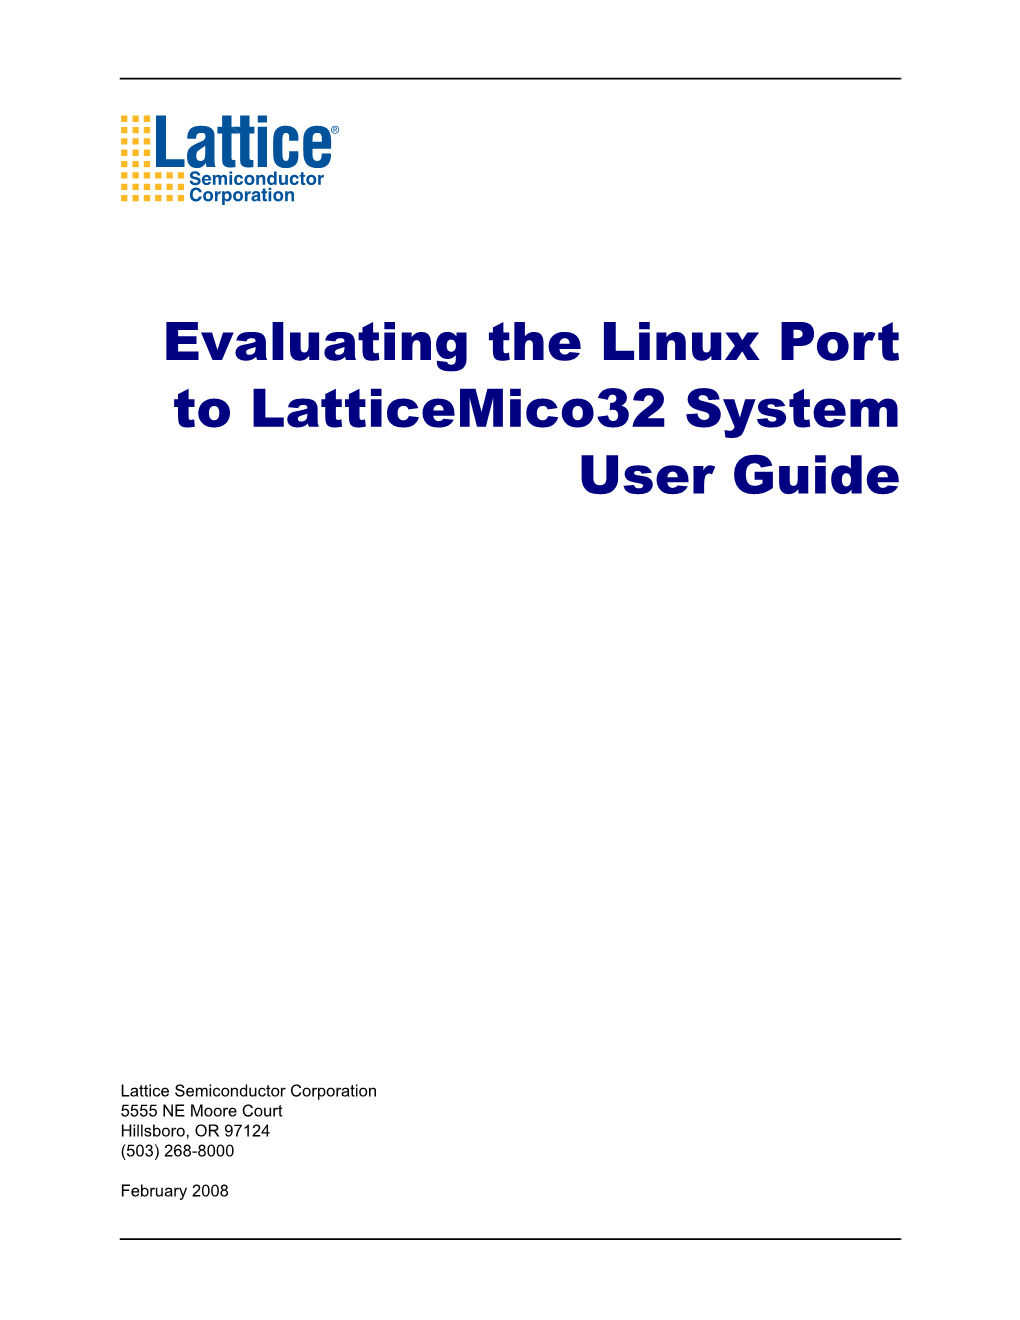 Evaluating the Linux Port to Latticemico32 System User Guide